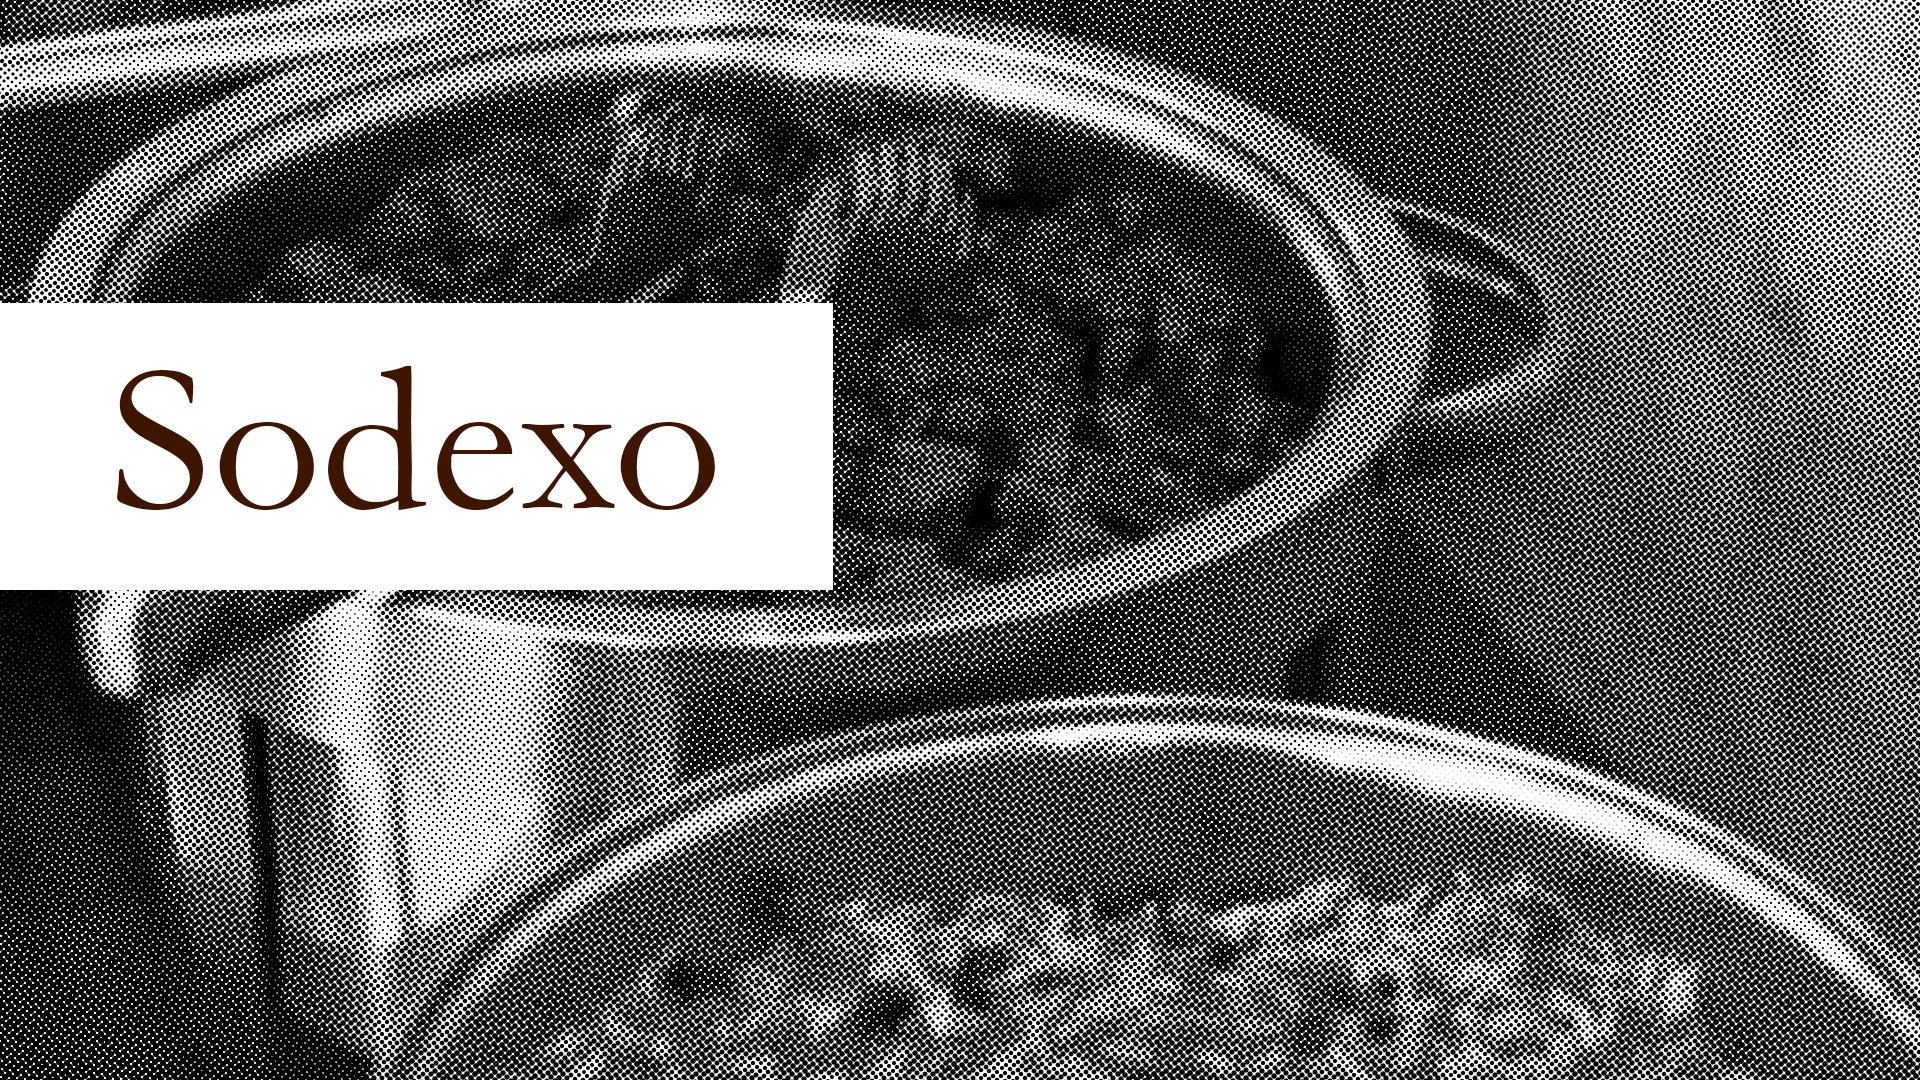 Sodexo: a controversial, yet interesting opportunity